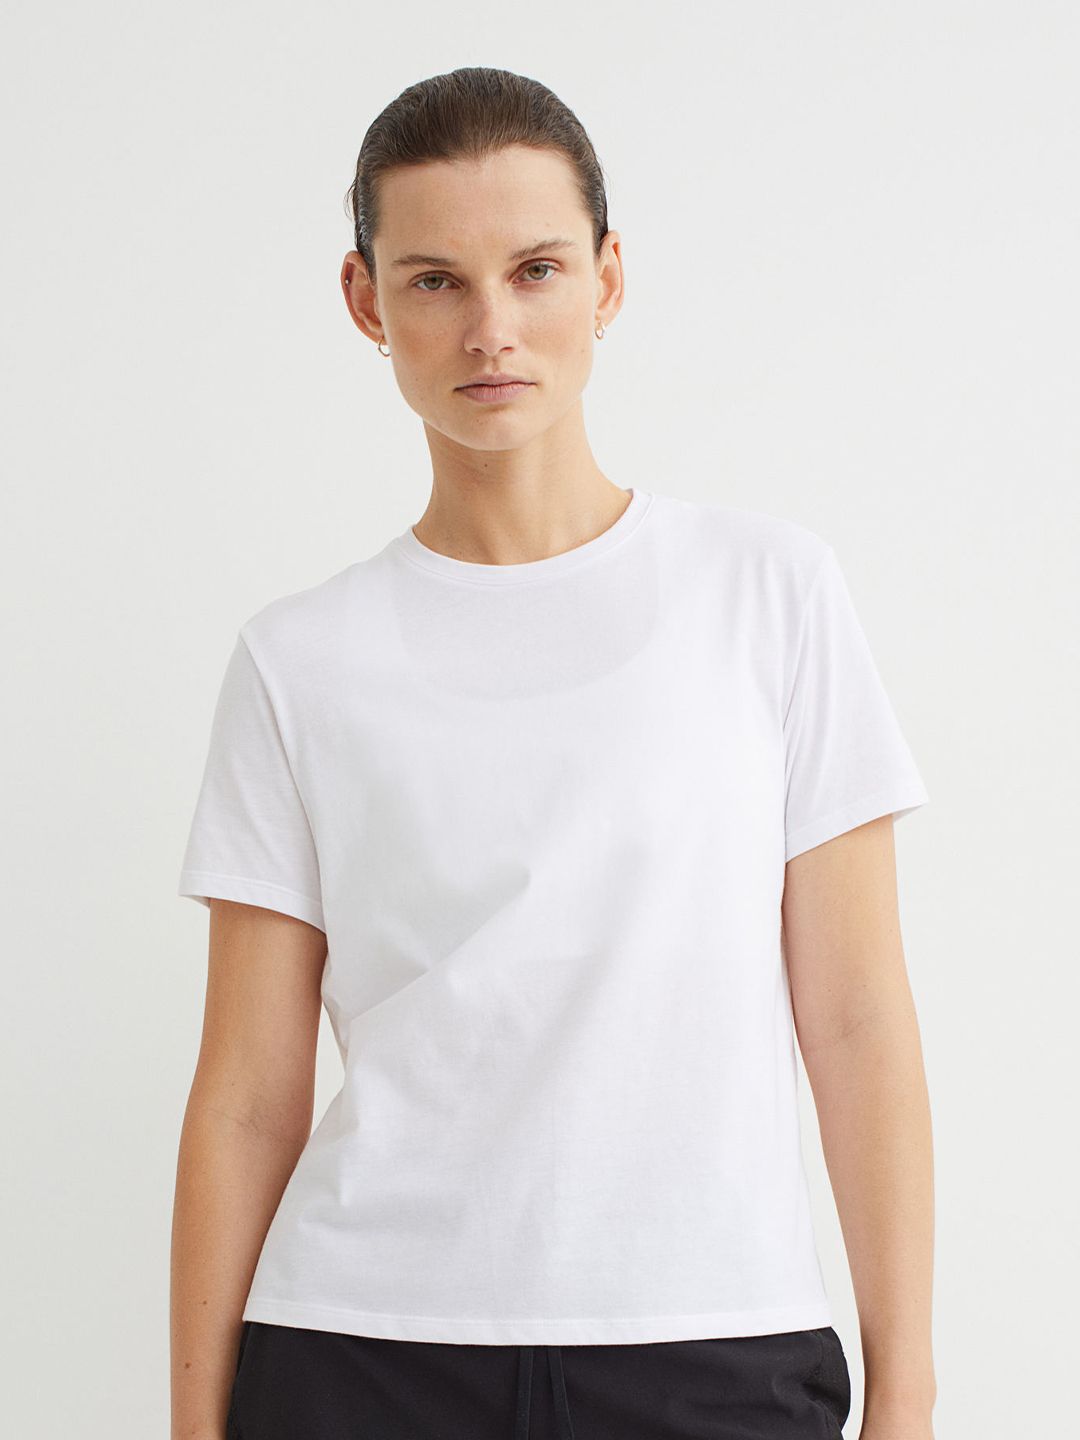 H&M Women White Rapid-Dry Boxy Sports Top Price in India